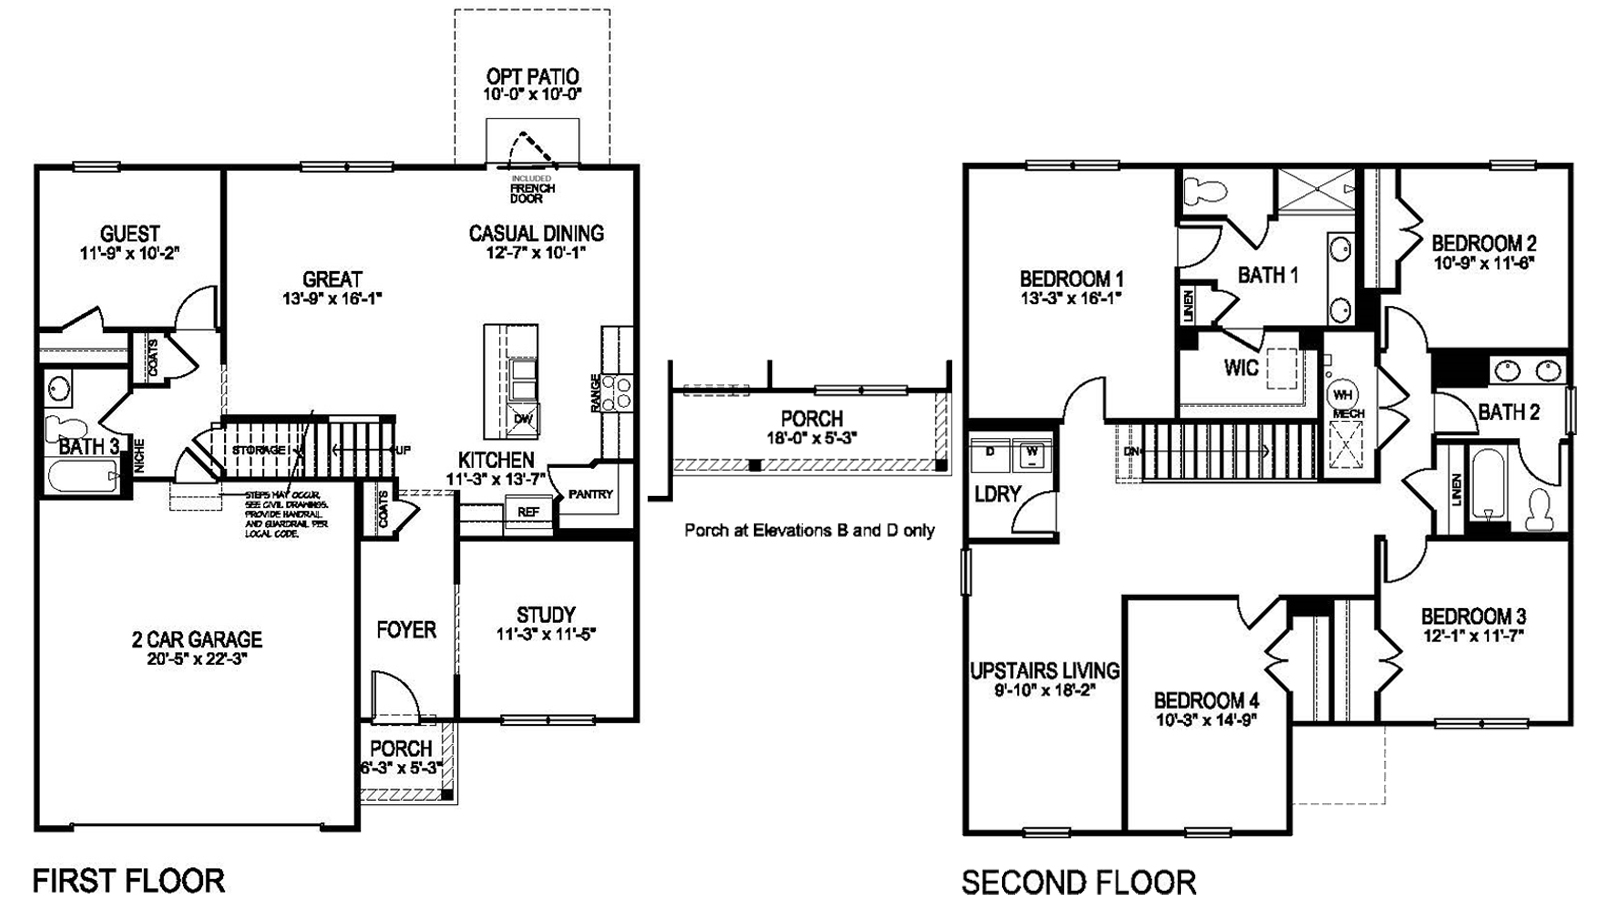 This two-story floorplan provides 5 large bedrooms and 3 full baths featuring one bedroom and full bath on the main level.